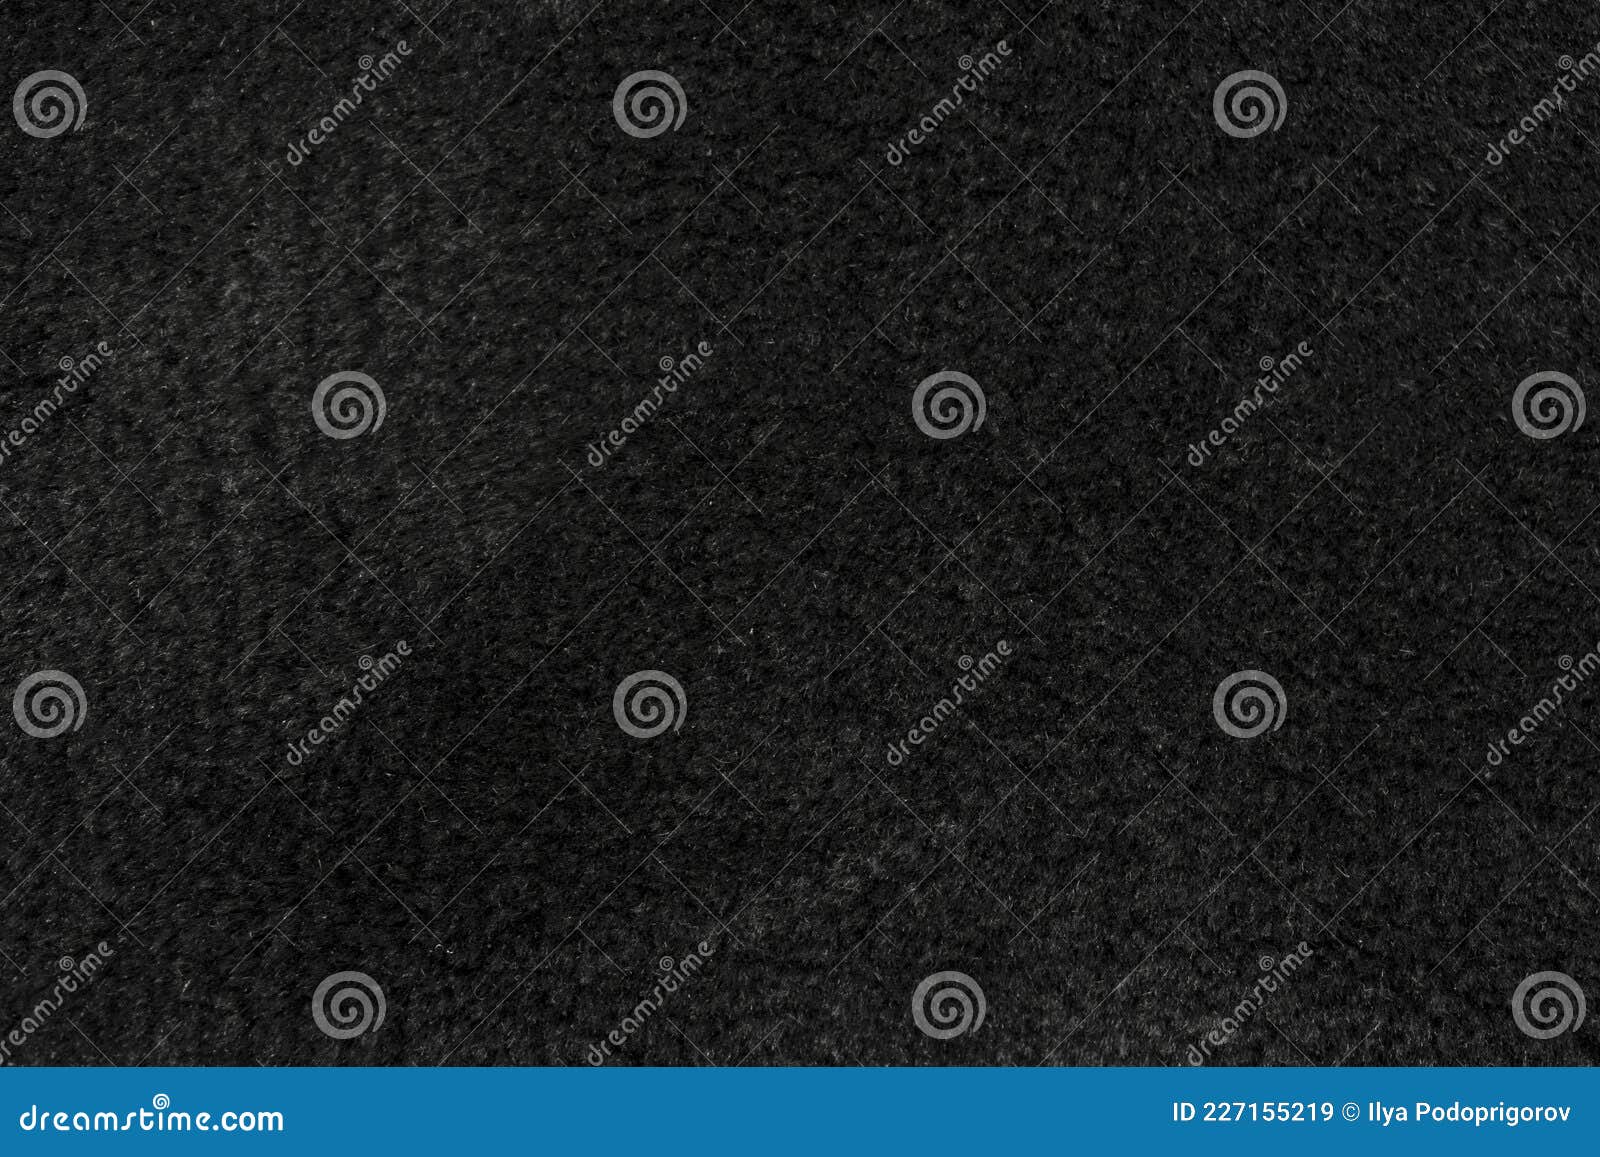 Black Wool Seamless Texture Background. Dark Texture with Short Factory ...